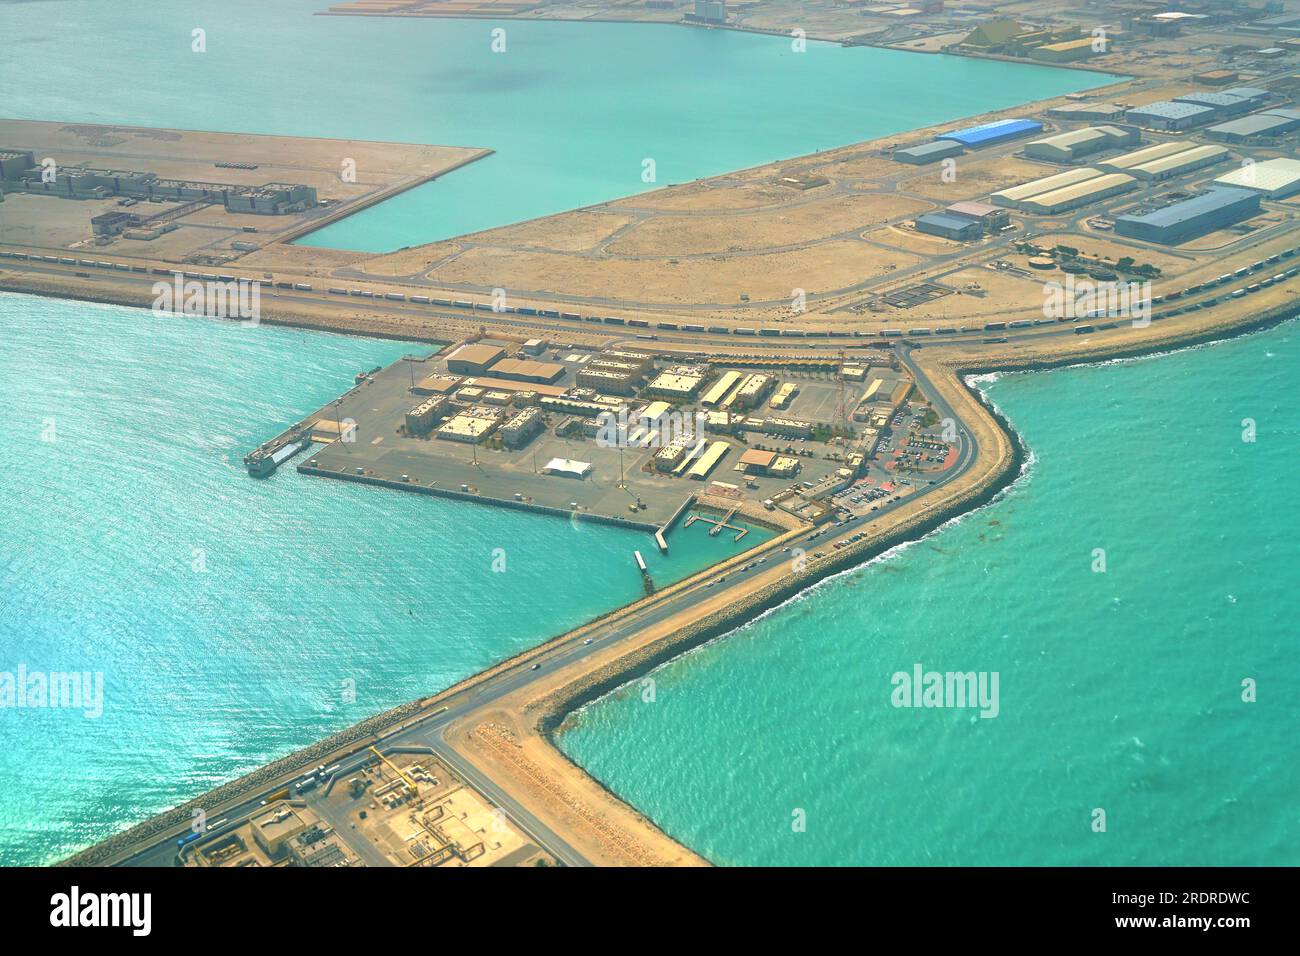 Port and warehouse zone in Bahrain - aerial view. Stock Photo